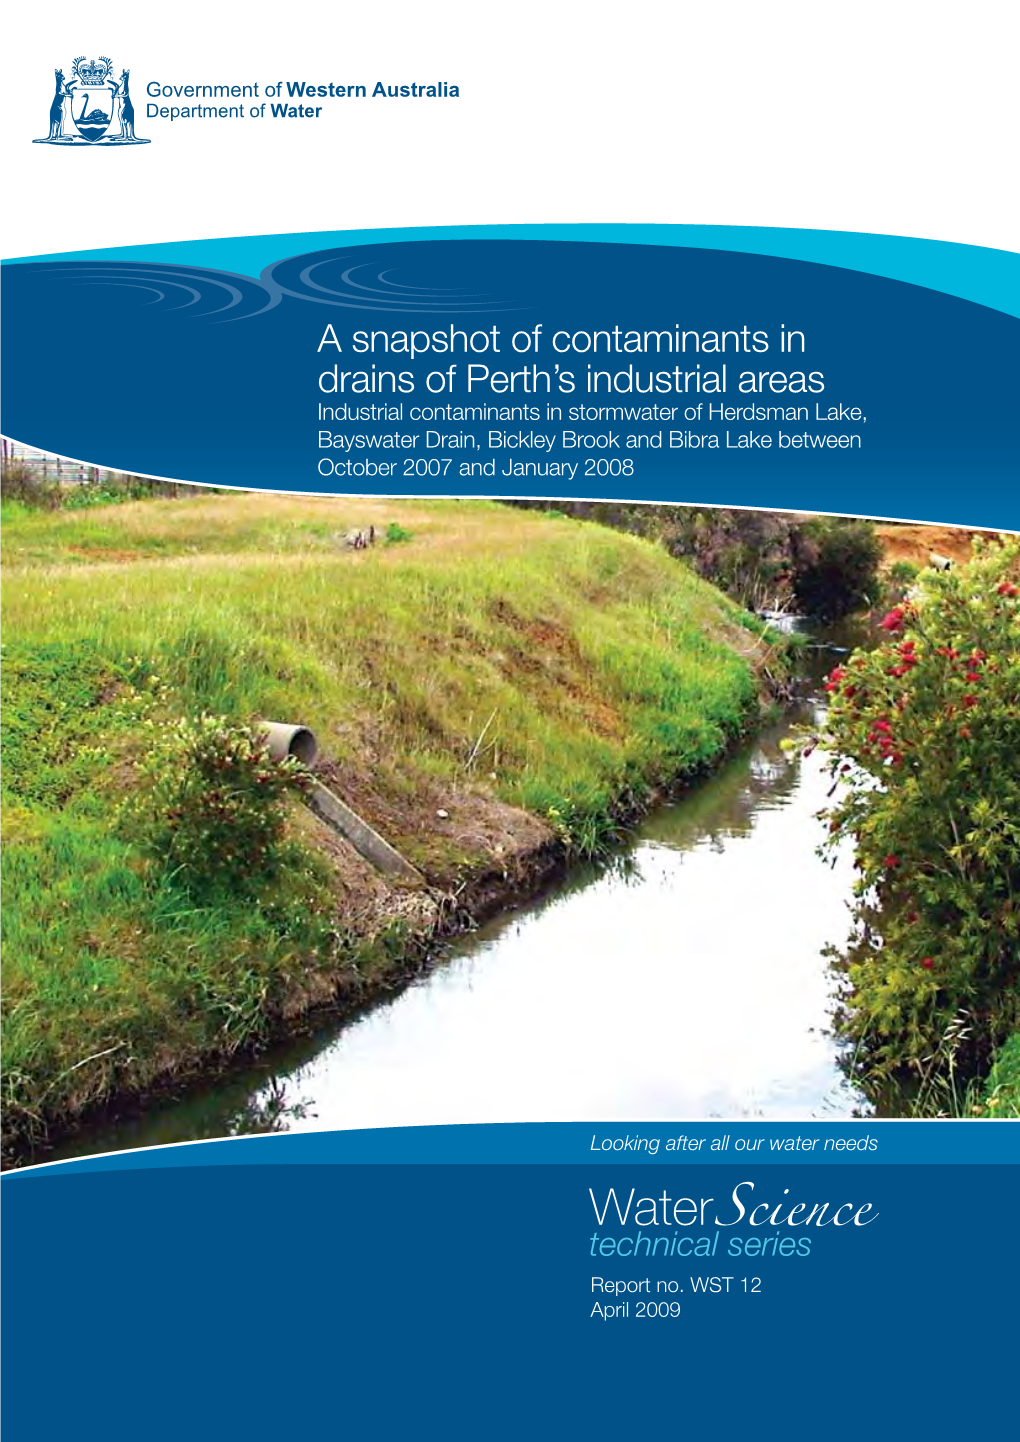 A Snapshot of Contaminants in Drains of Perth's Industrial Areas